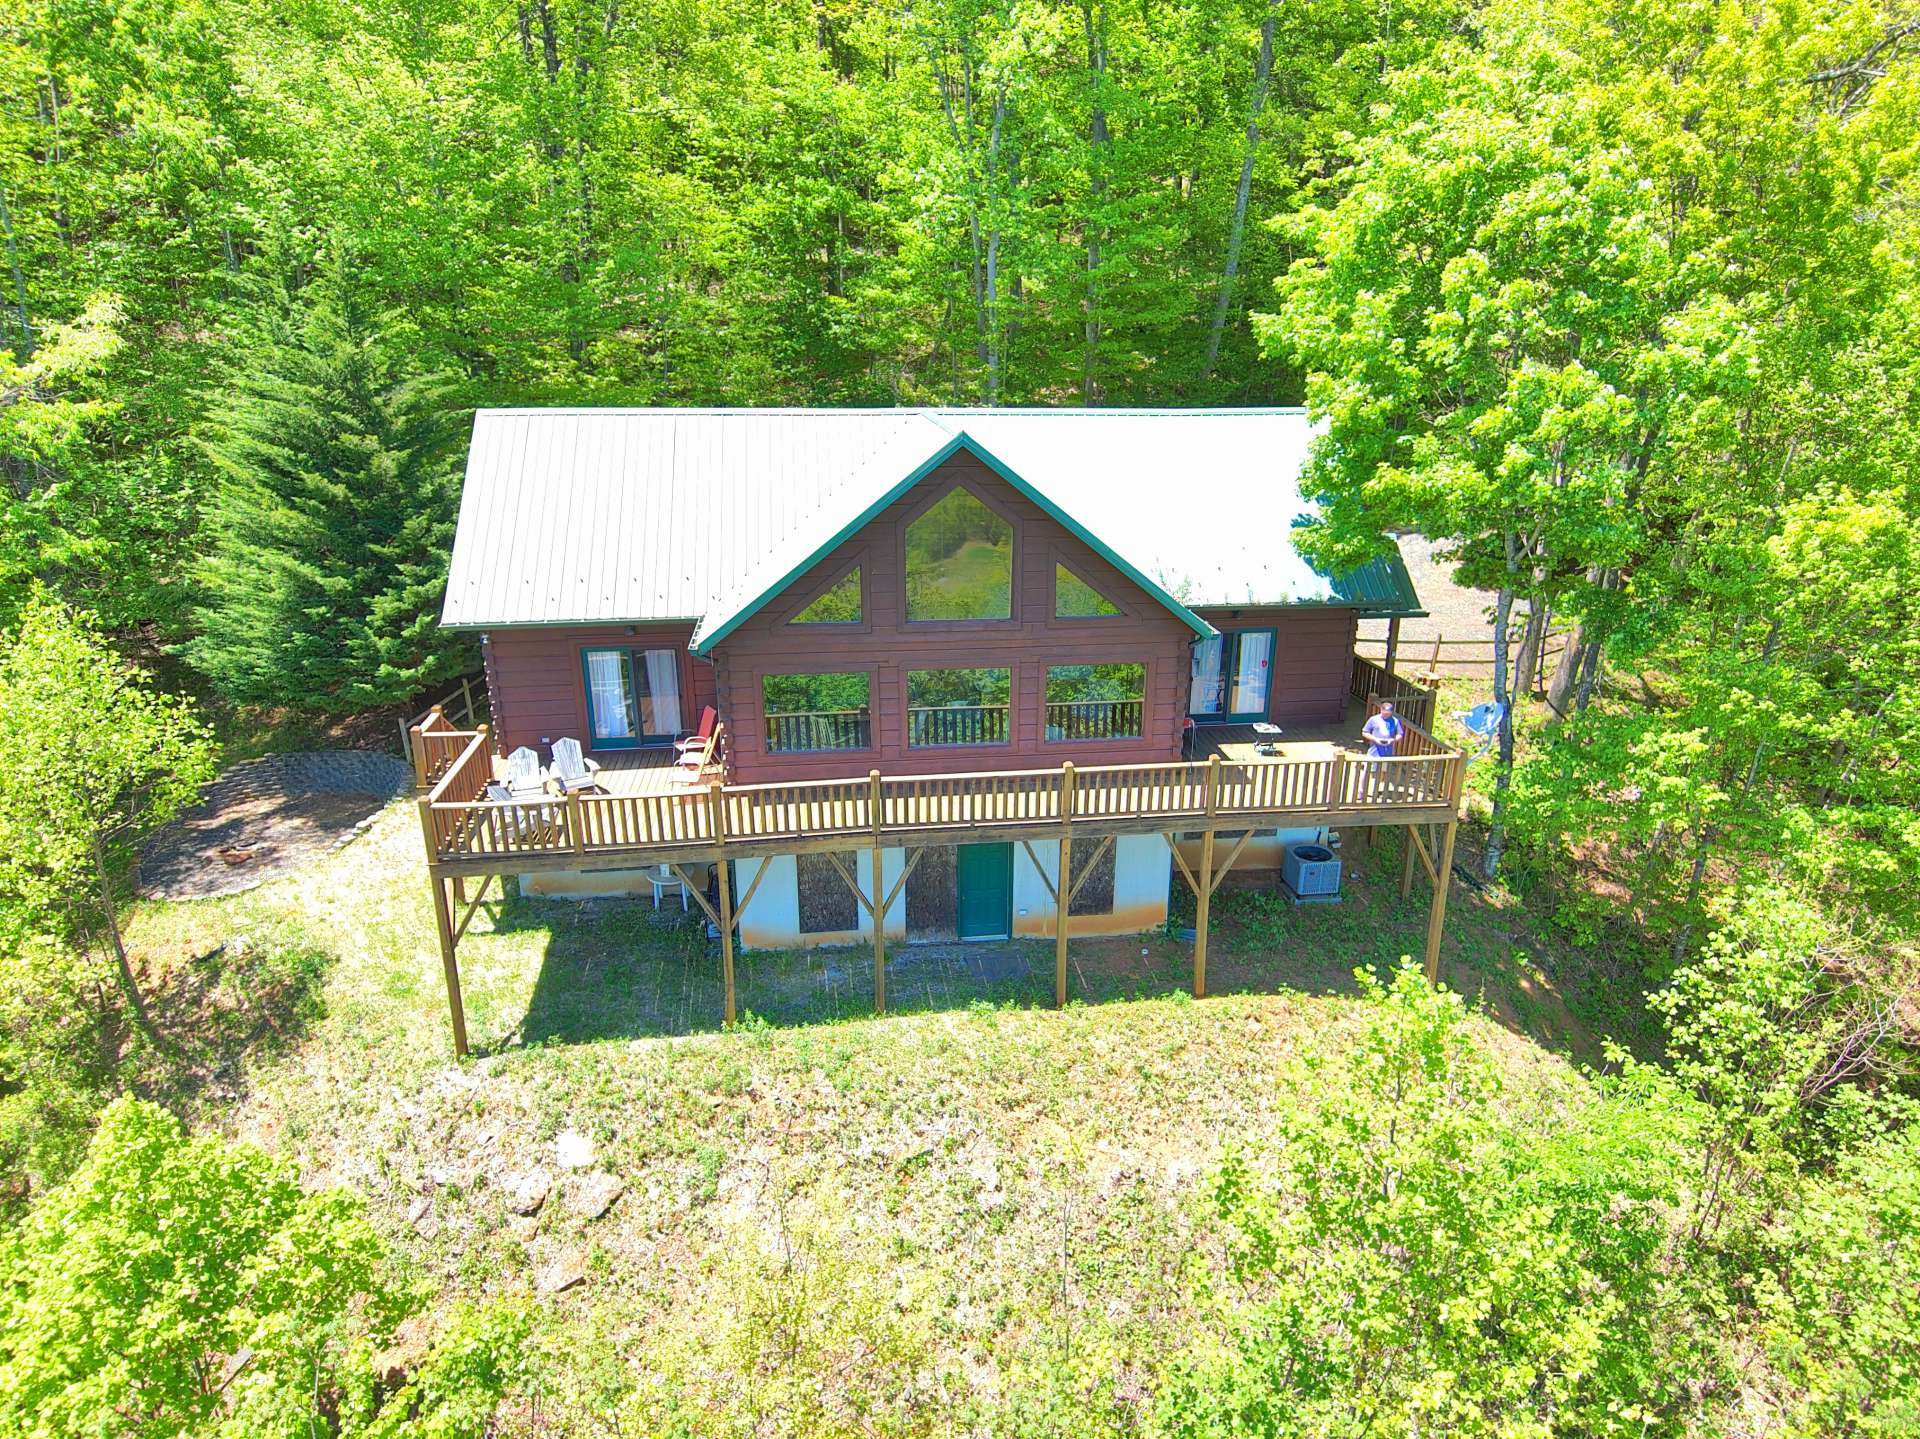 While this unique mountain estate is private, the location is only minutes to downtown West Jefferson for shopping and dining out.  Or, pack up the kayaks, tubes, and fishing poles for a day filled with water activities on the nearby New River.  Call today for additional information on listing N127, the ideal mountain retreat.